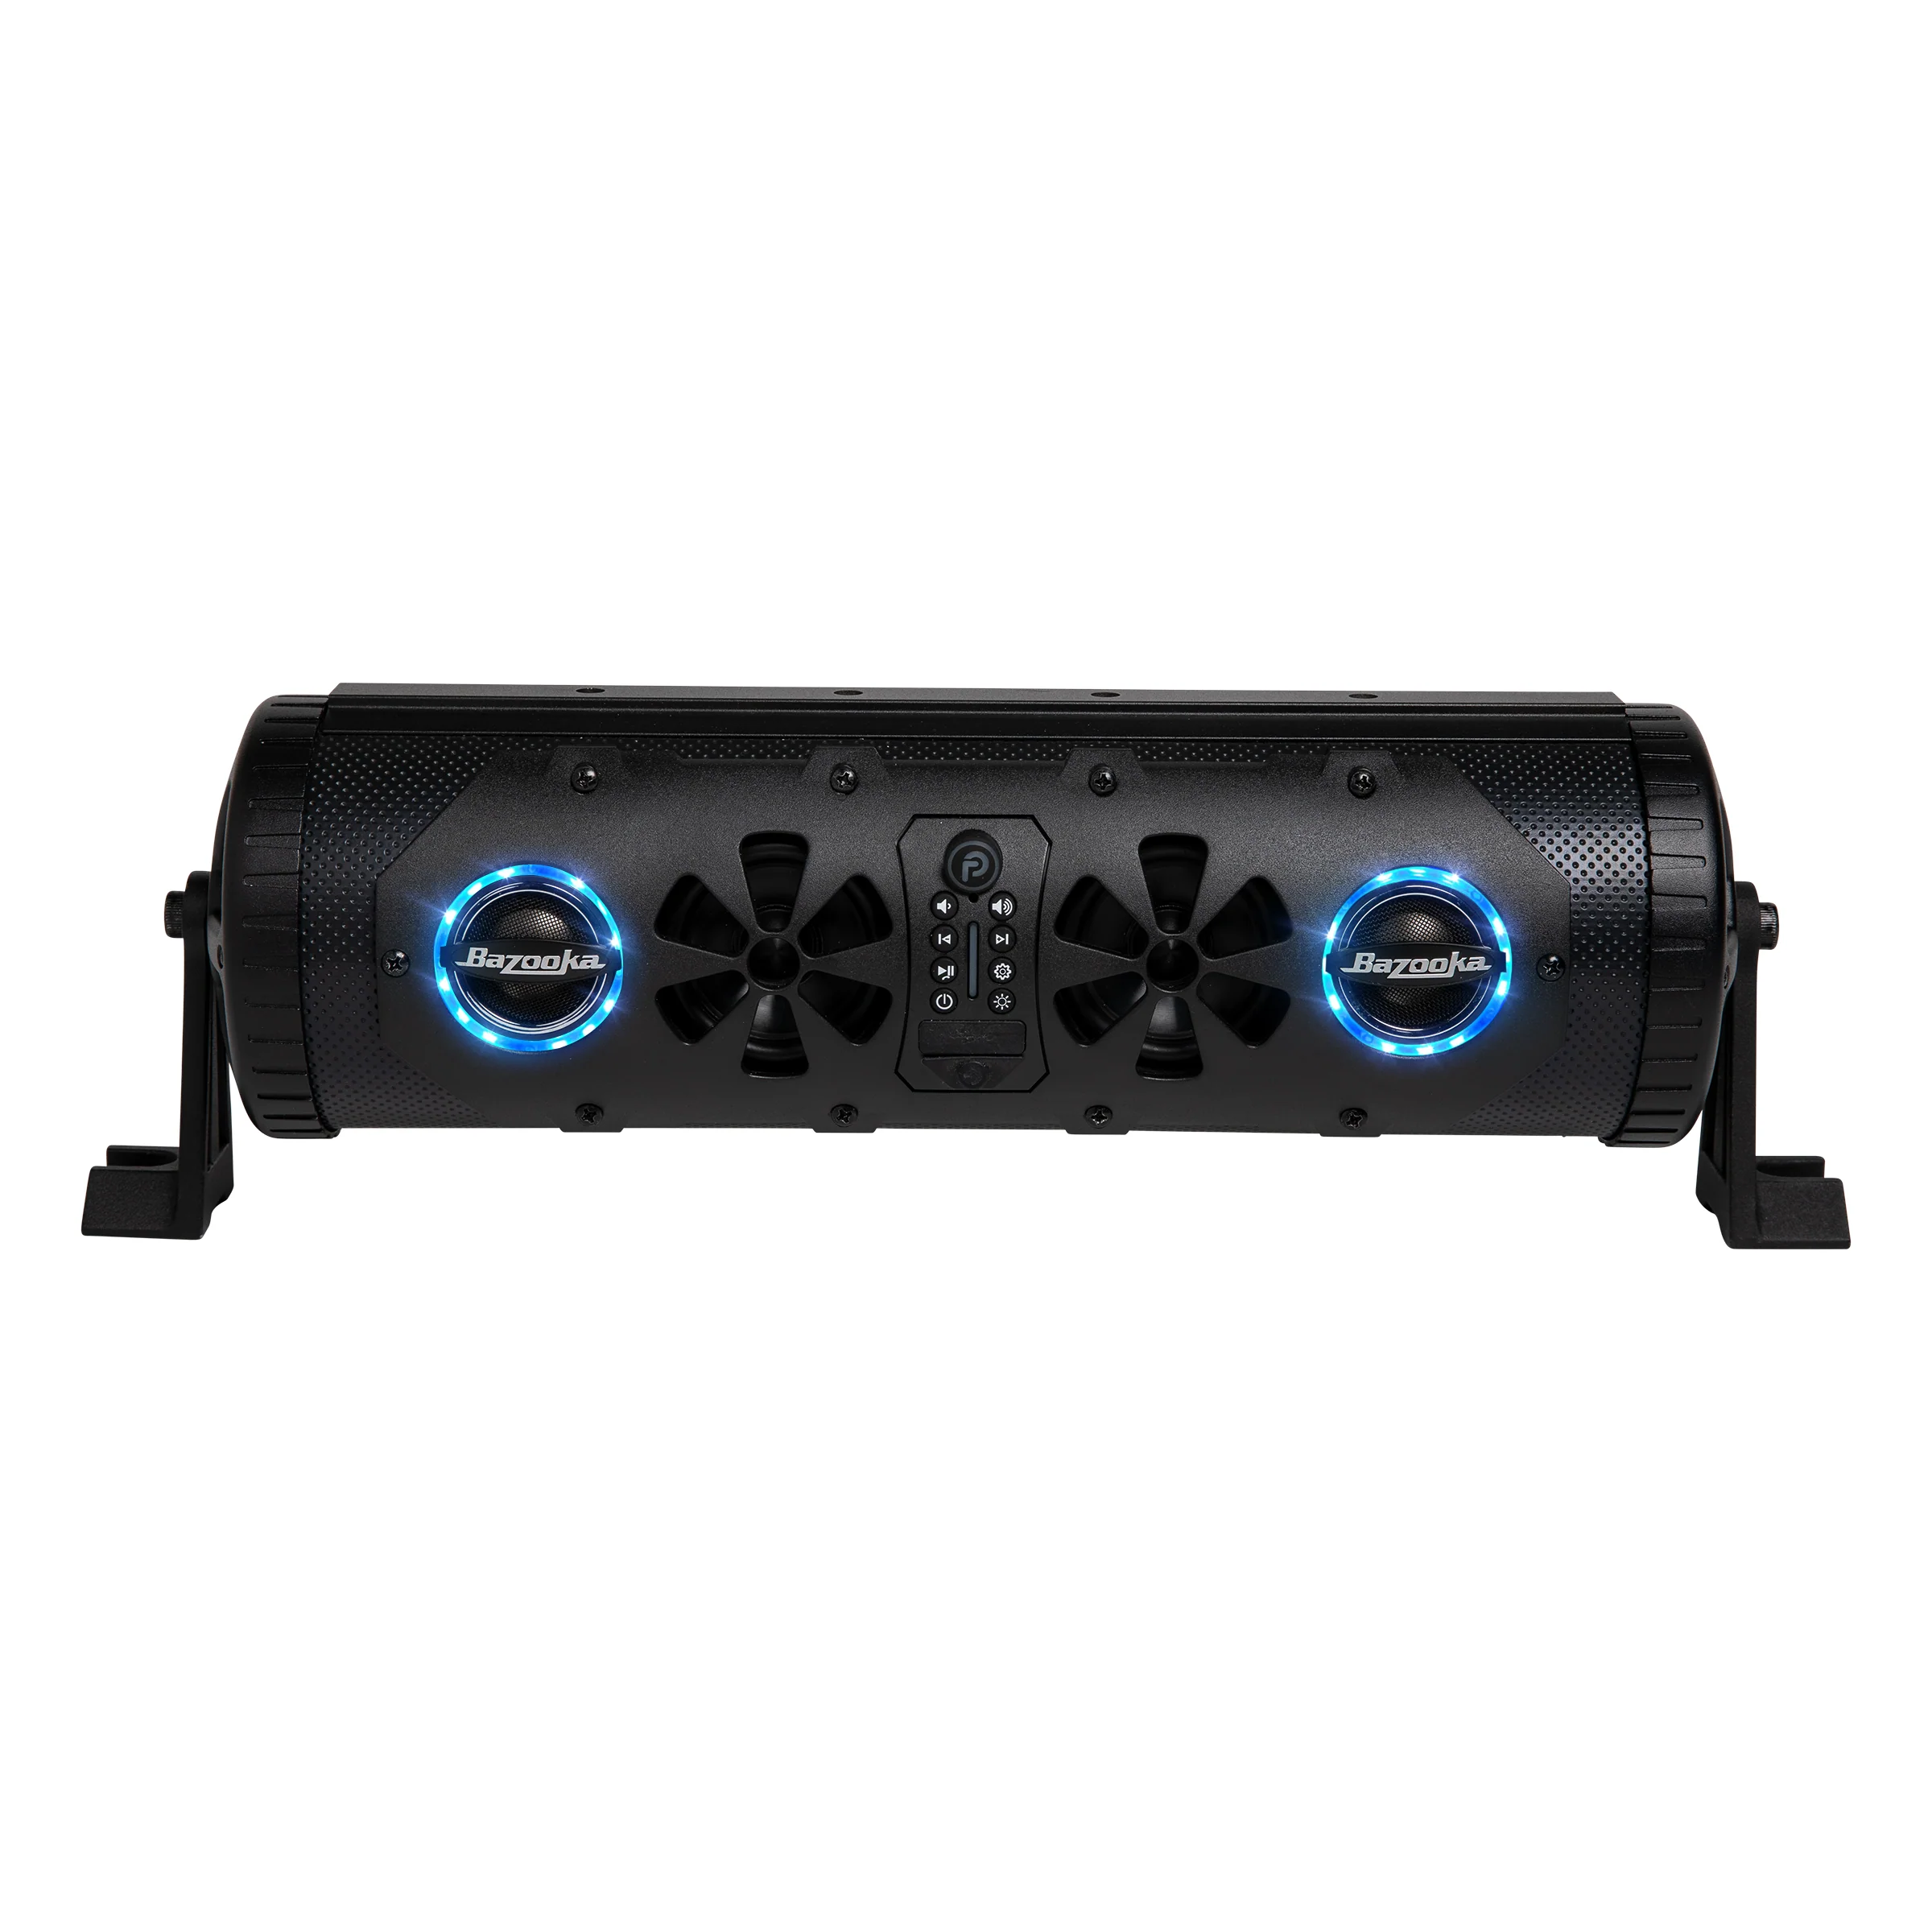 G3 Party Bar - 12V soundbar featuring One-Click Party Button music-sharing technology Questions & Answers